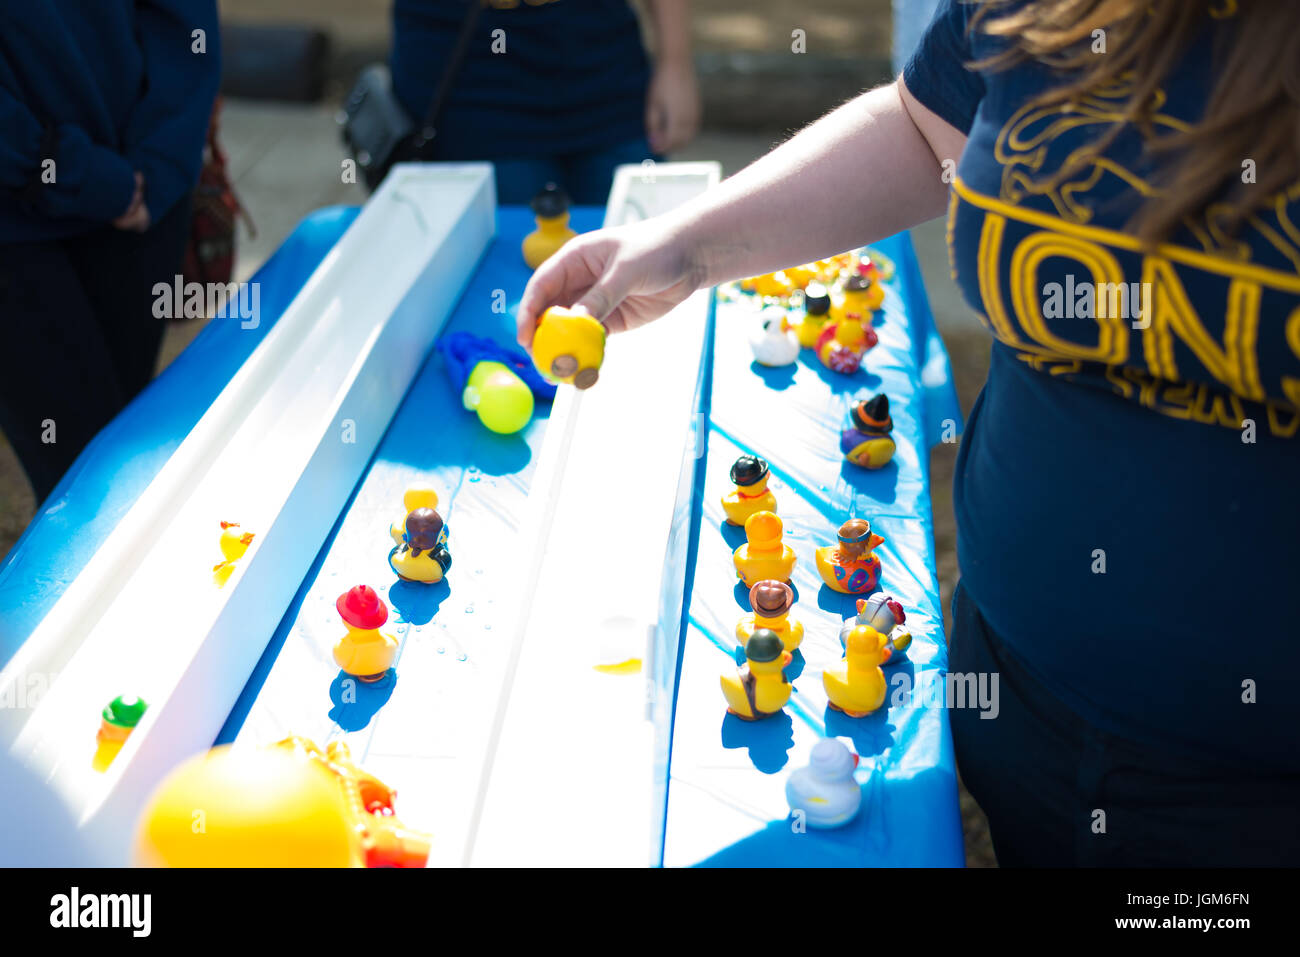 Rubber duck water gun shooting game at volunteer charity festival Stock Photo